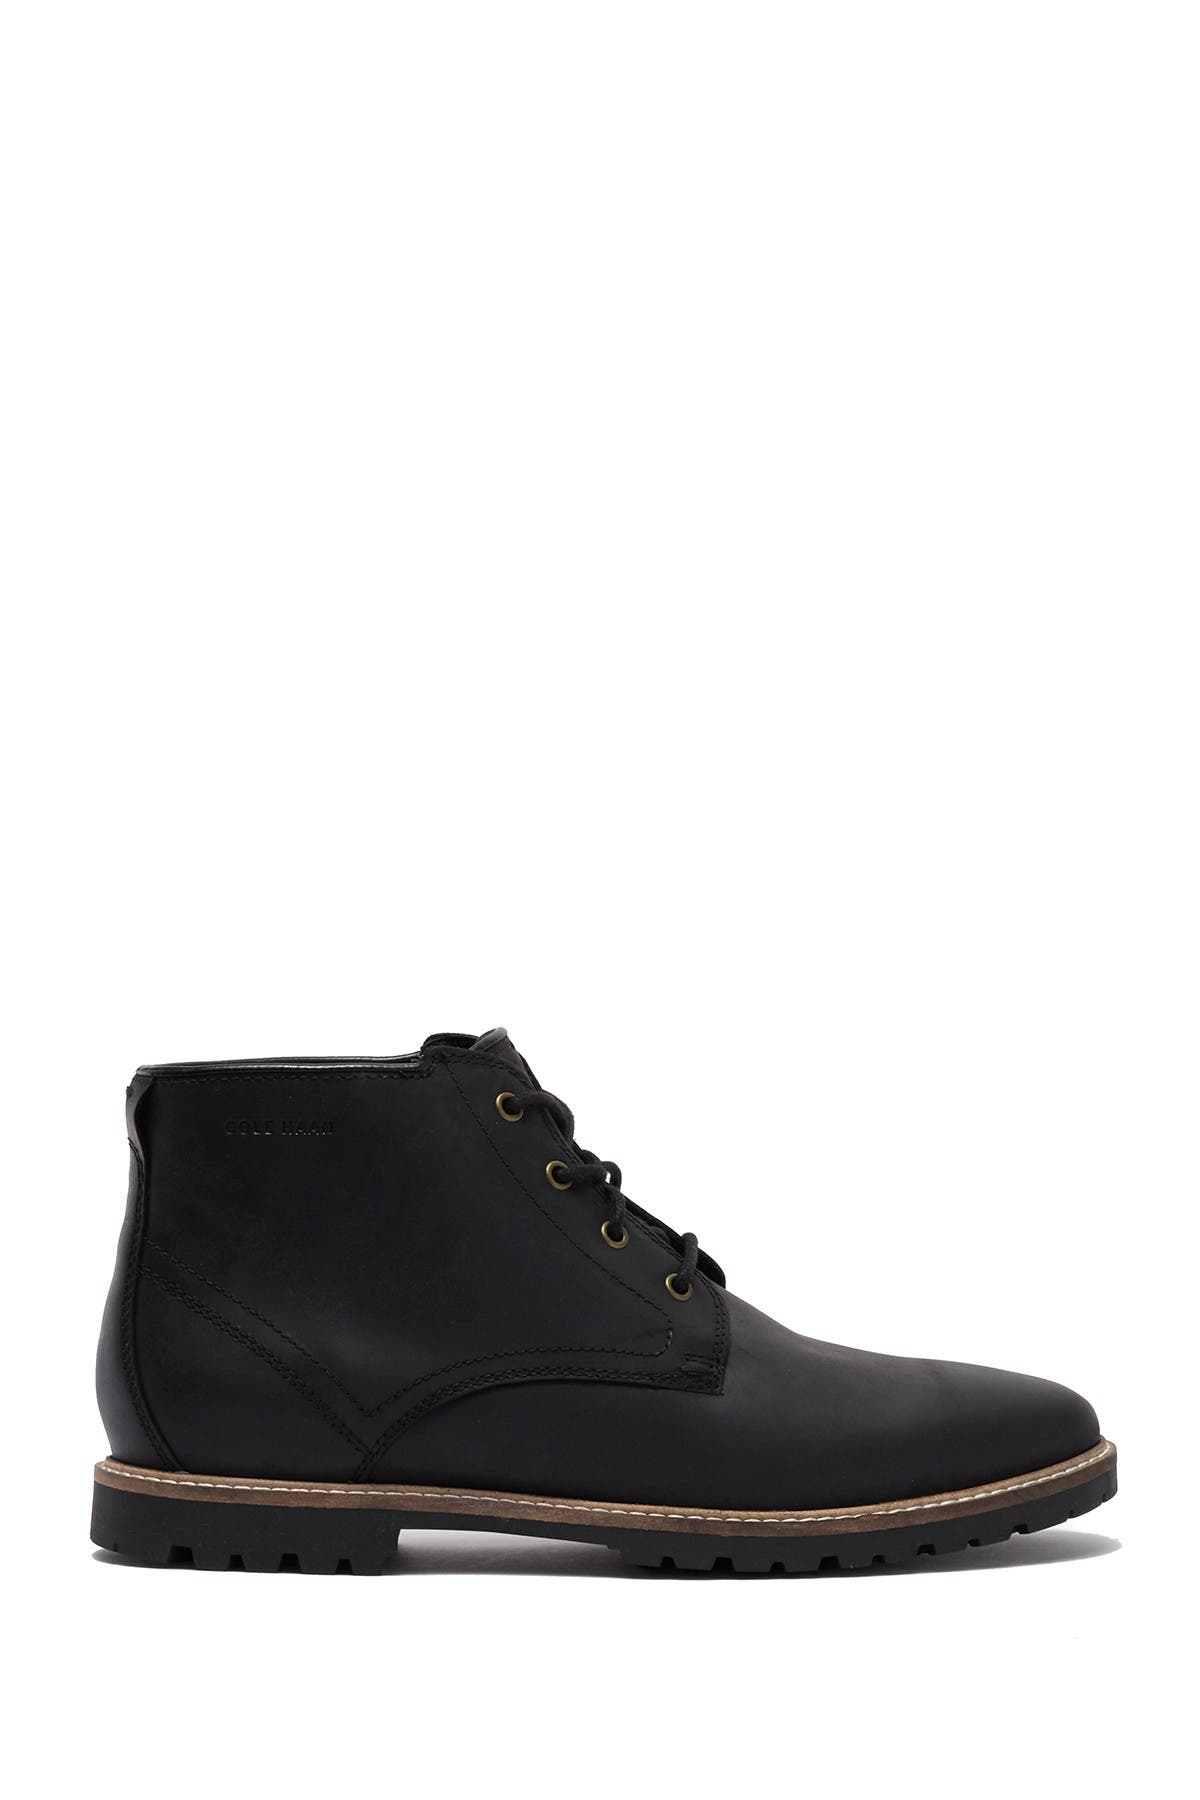 Cole Haan | Nathan Leather Chukka Boot | Nordstrom Rack